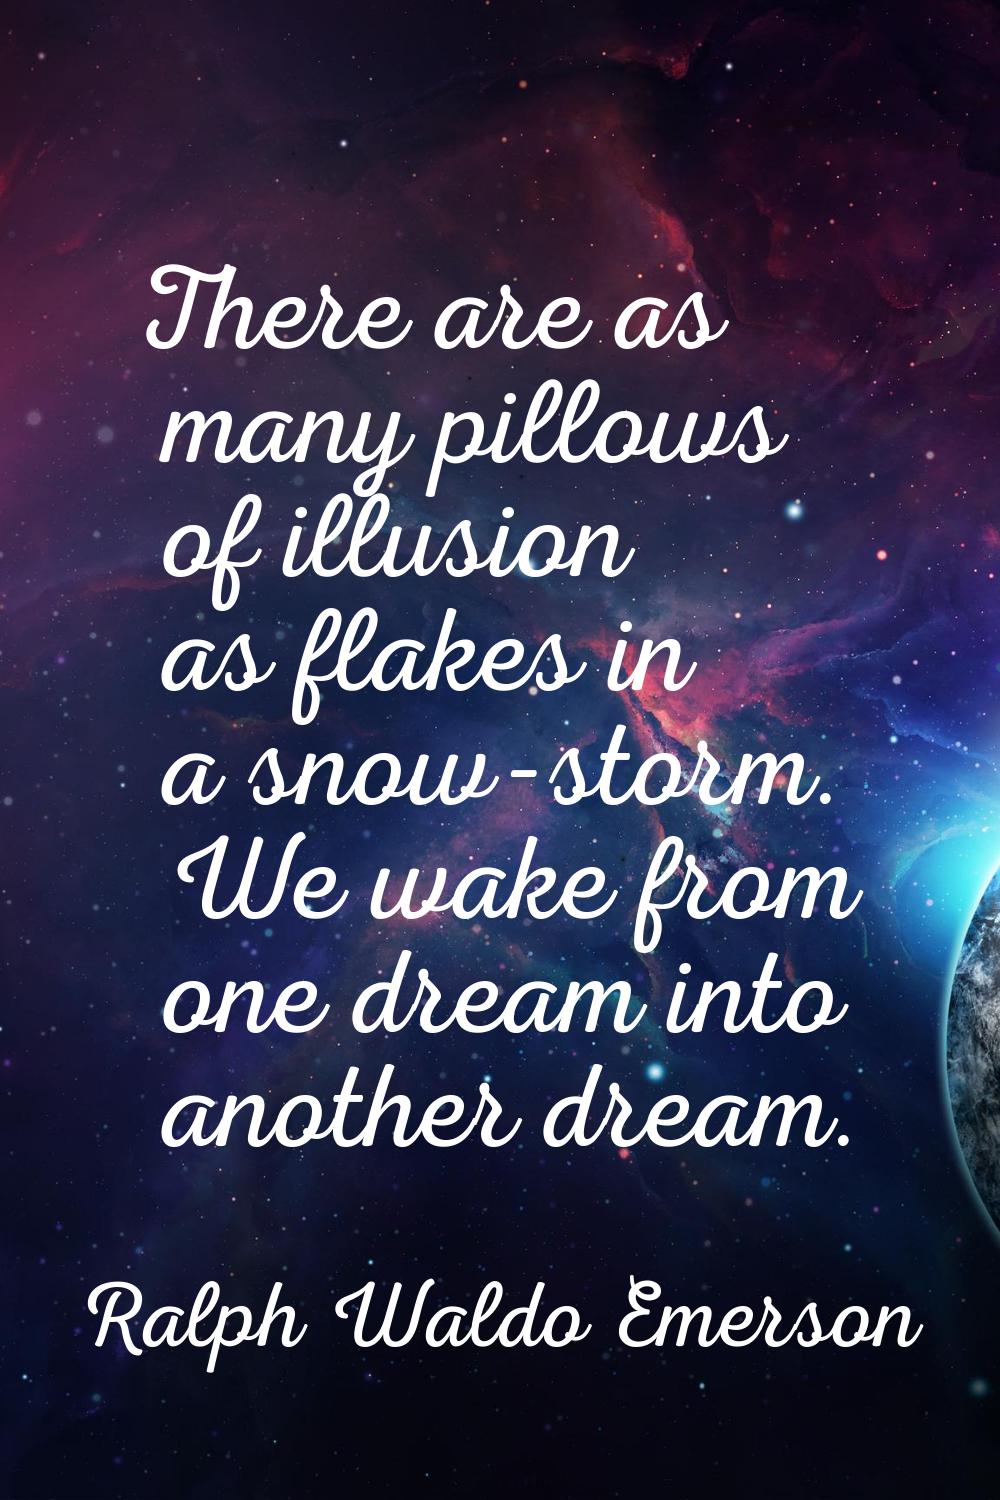 There are as many pillows of illusion as flakes in a snow-storm. We wake from one dream into anothe